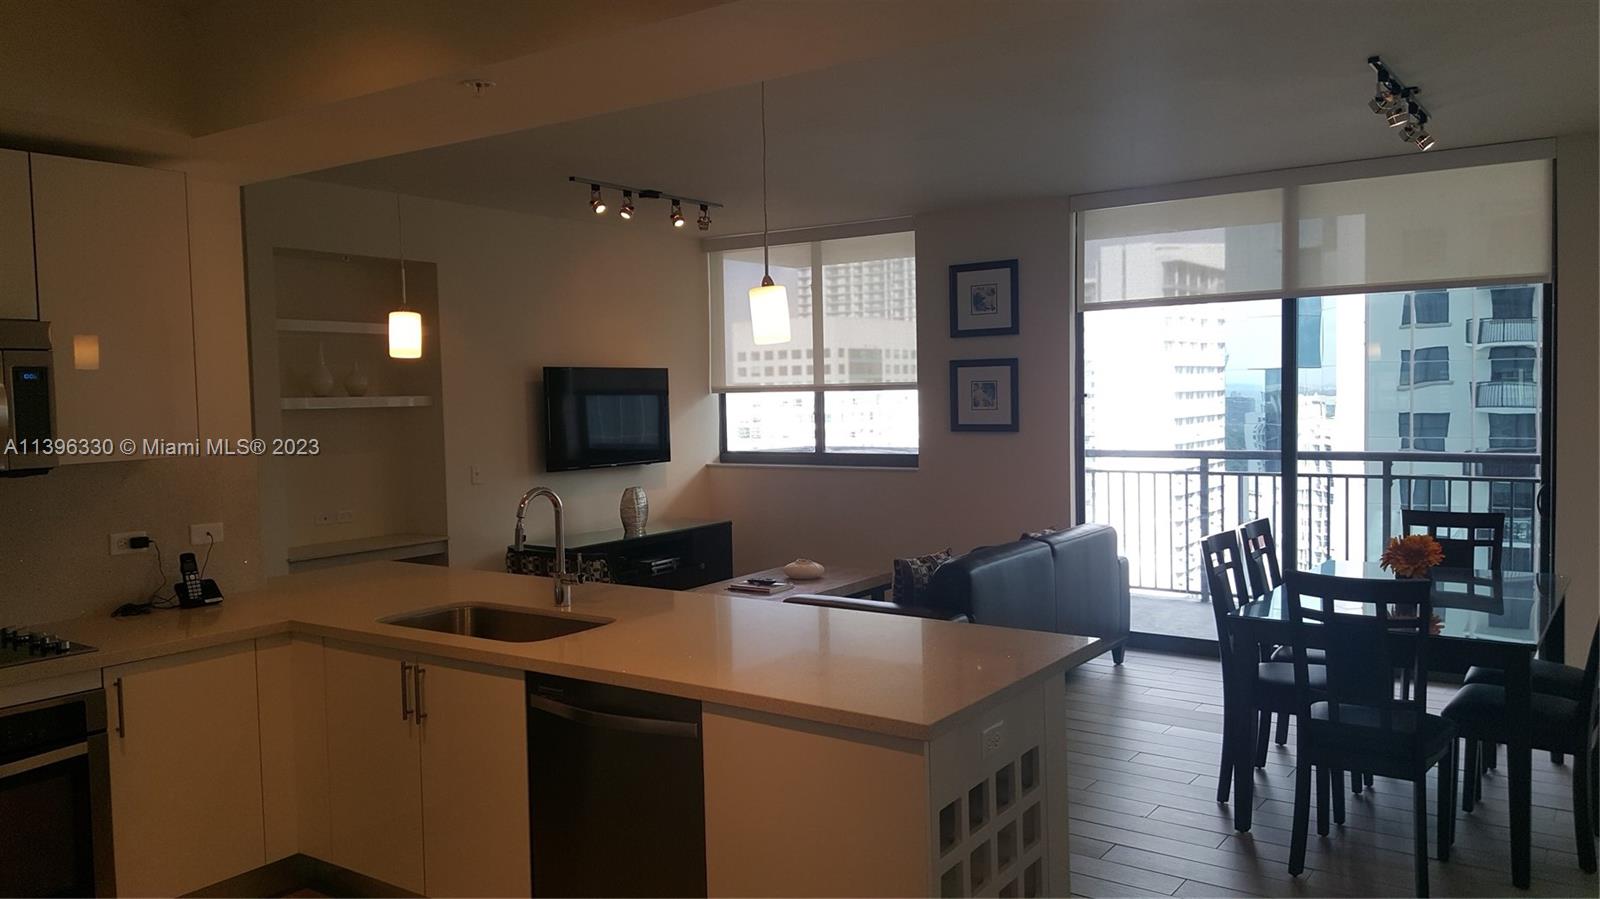 Fully furnished 2/2 (with Tile in Bedrooms as Well) in luxury building located in Mary Brickell Village. Nicely decorated. Master has king bed. Second bedroom has 2 twin beds. TV and in all rooms. Unit features a contemporary white kitchen with quartz countertops and full height backsplash, High-performance stainless steel appliances, full size washer and dryer, spacious walk-in closets, imported porcelain tile flooring, and oversized bathrooms with designer lighting.